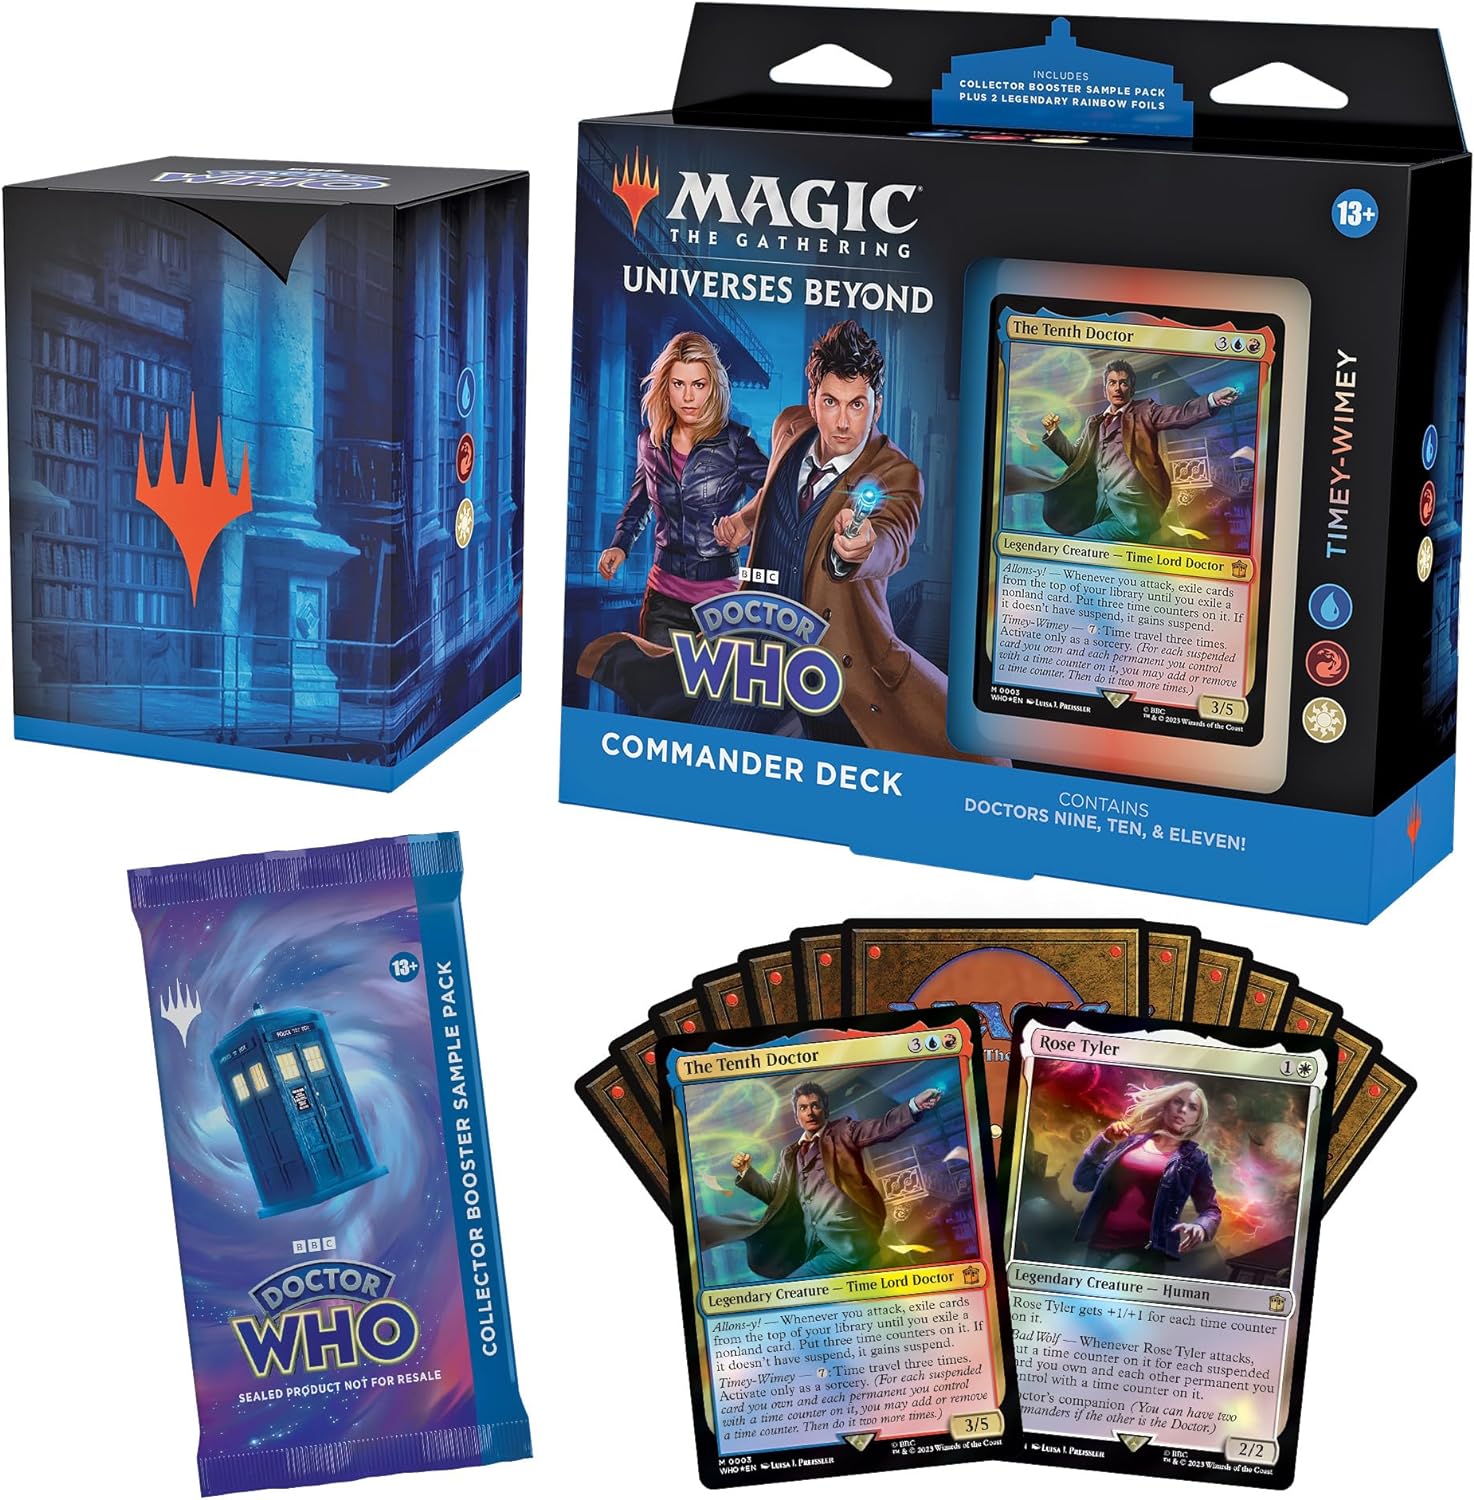 Magic The Gathering - Doctor Who Commander Deck Timey-Wimey MKRJD7HX37 |0|